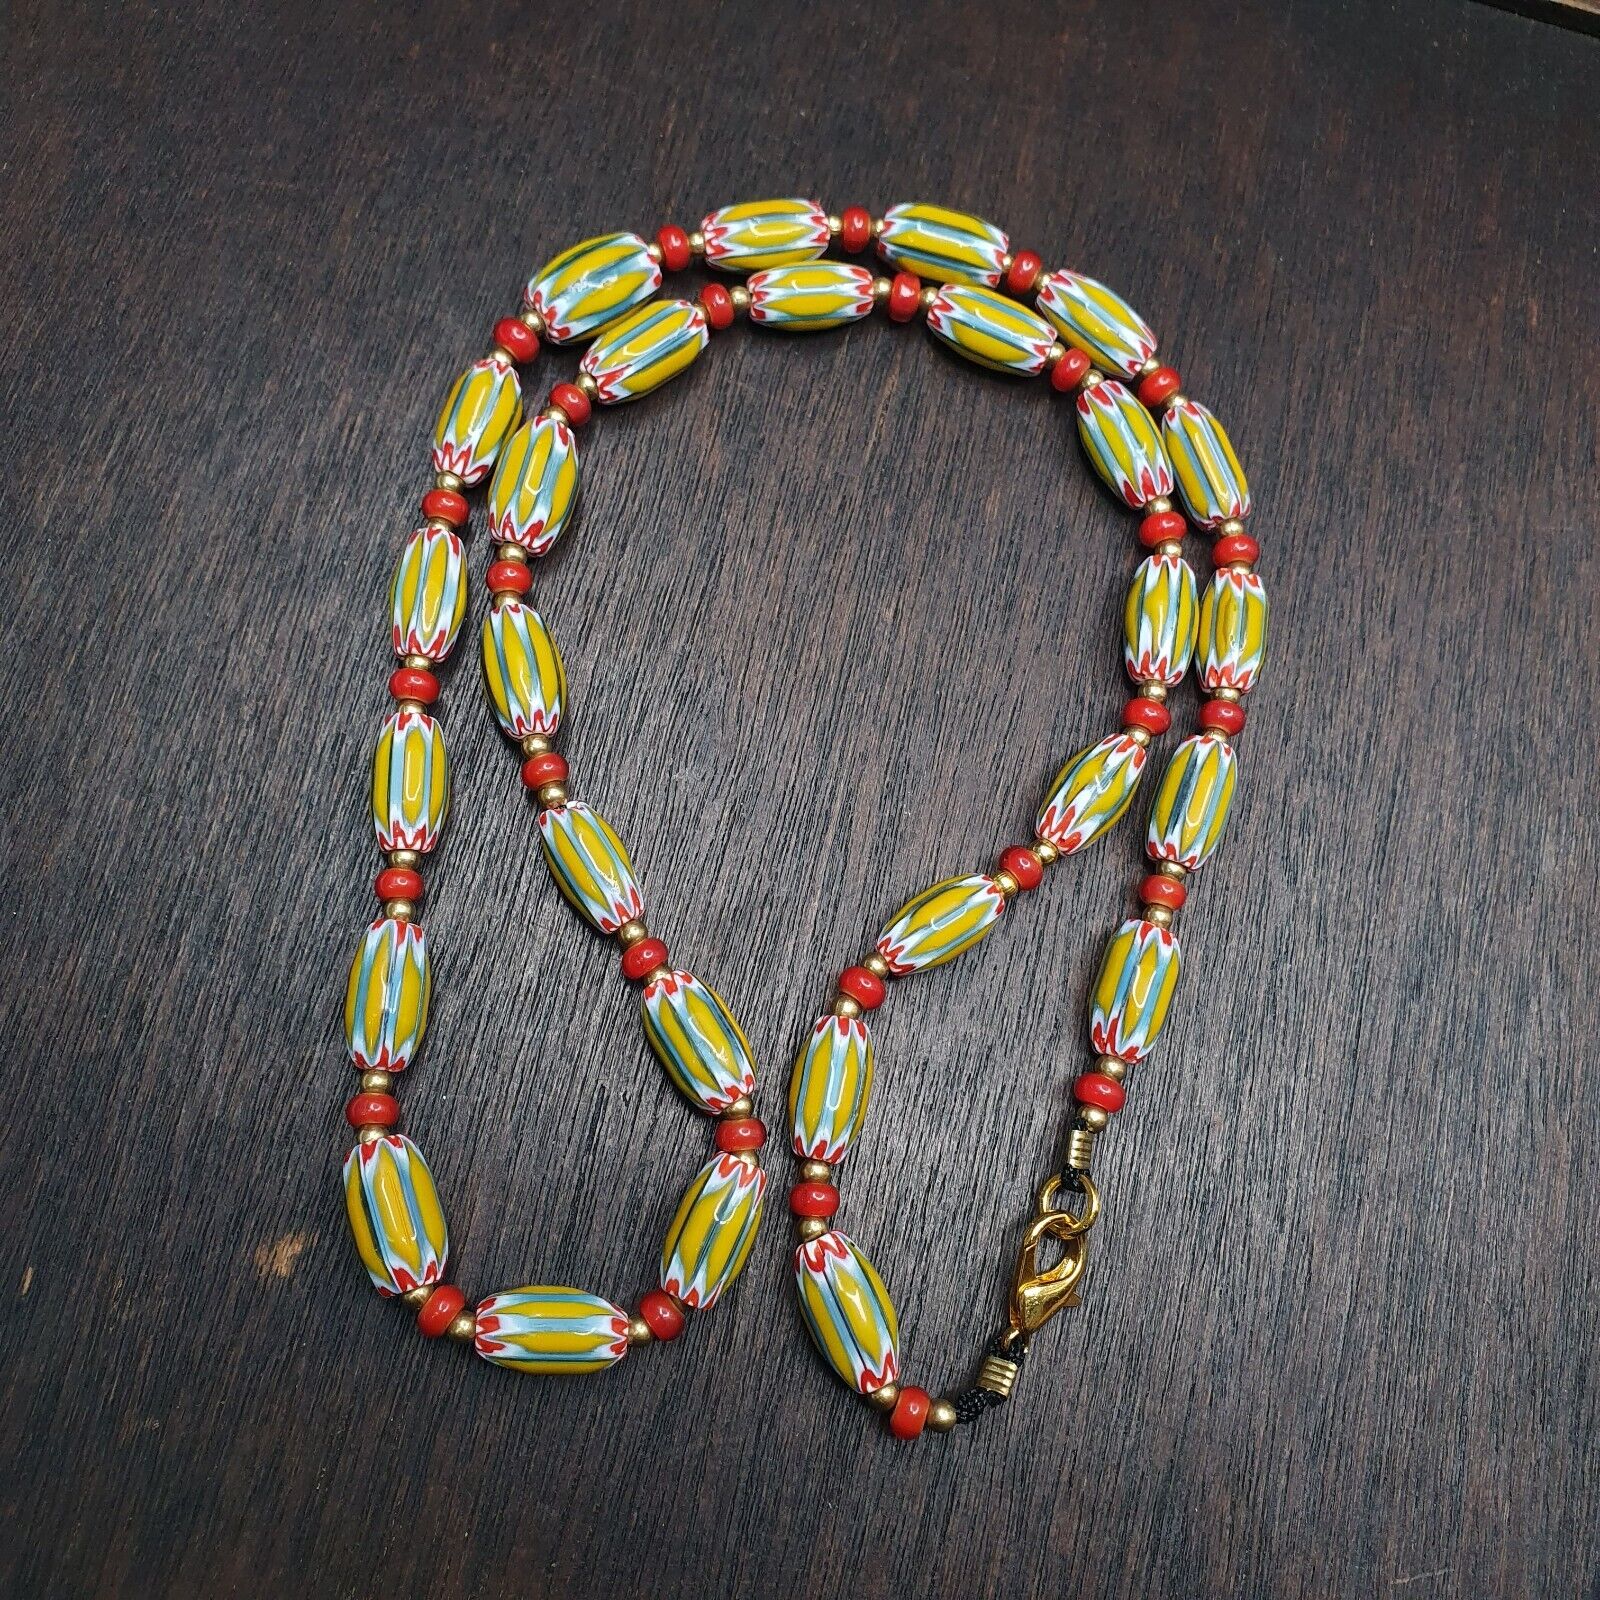 Vintage yellow Chevron whiteheart Trade beads Old African Beads Necklace